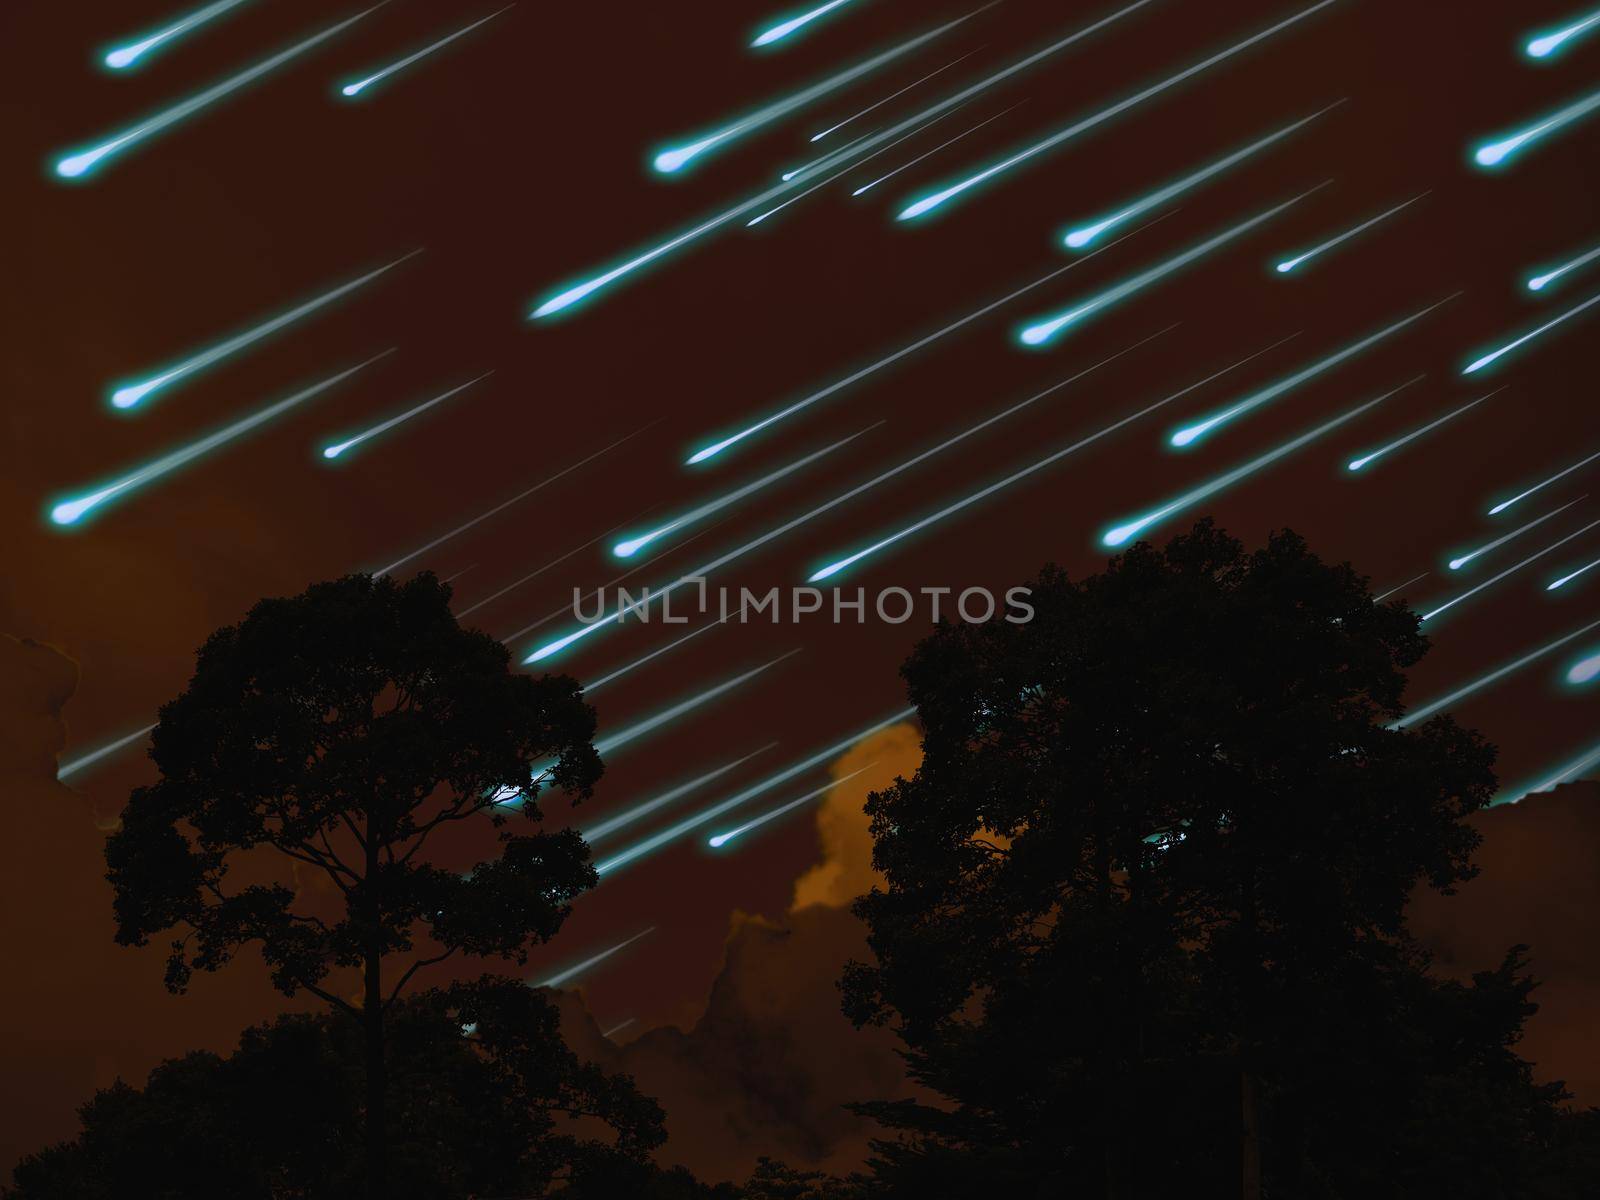 meteor on the night sky dark orange cloud and silhouette tree in tropic forest